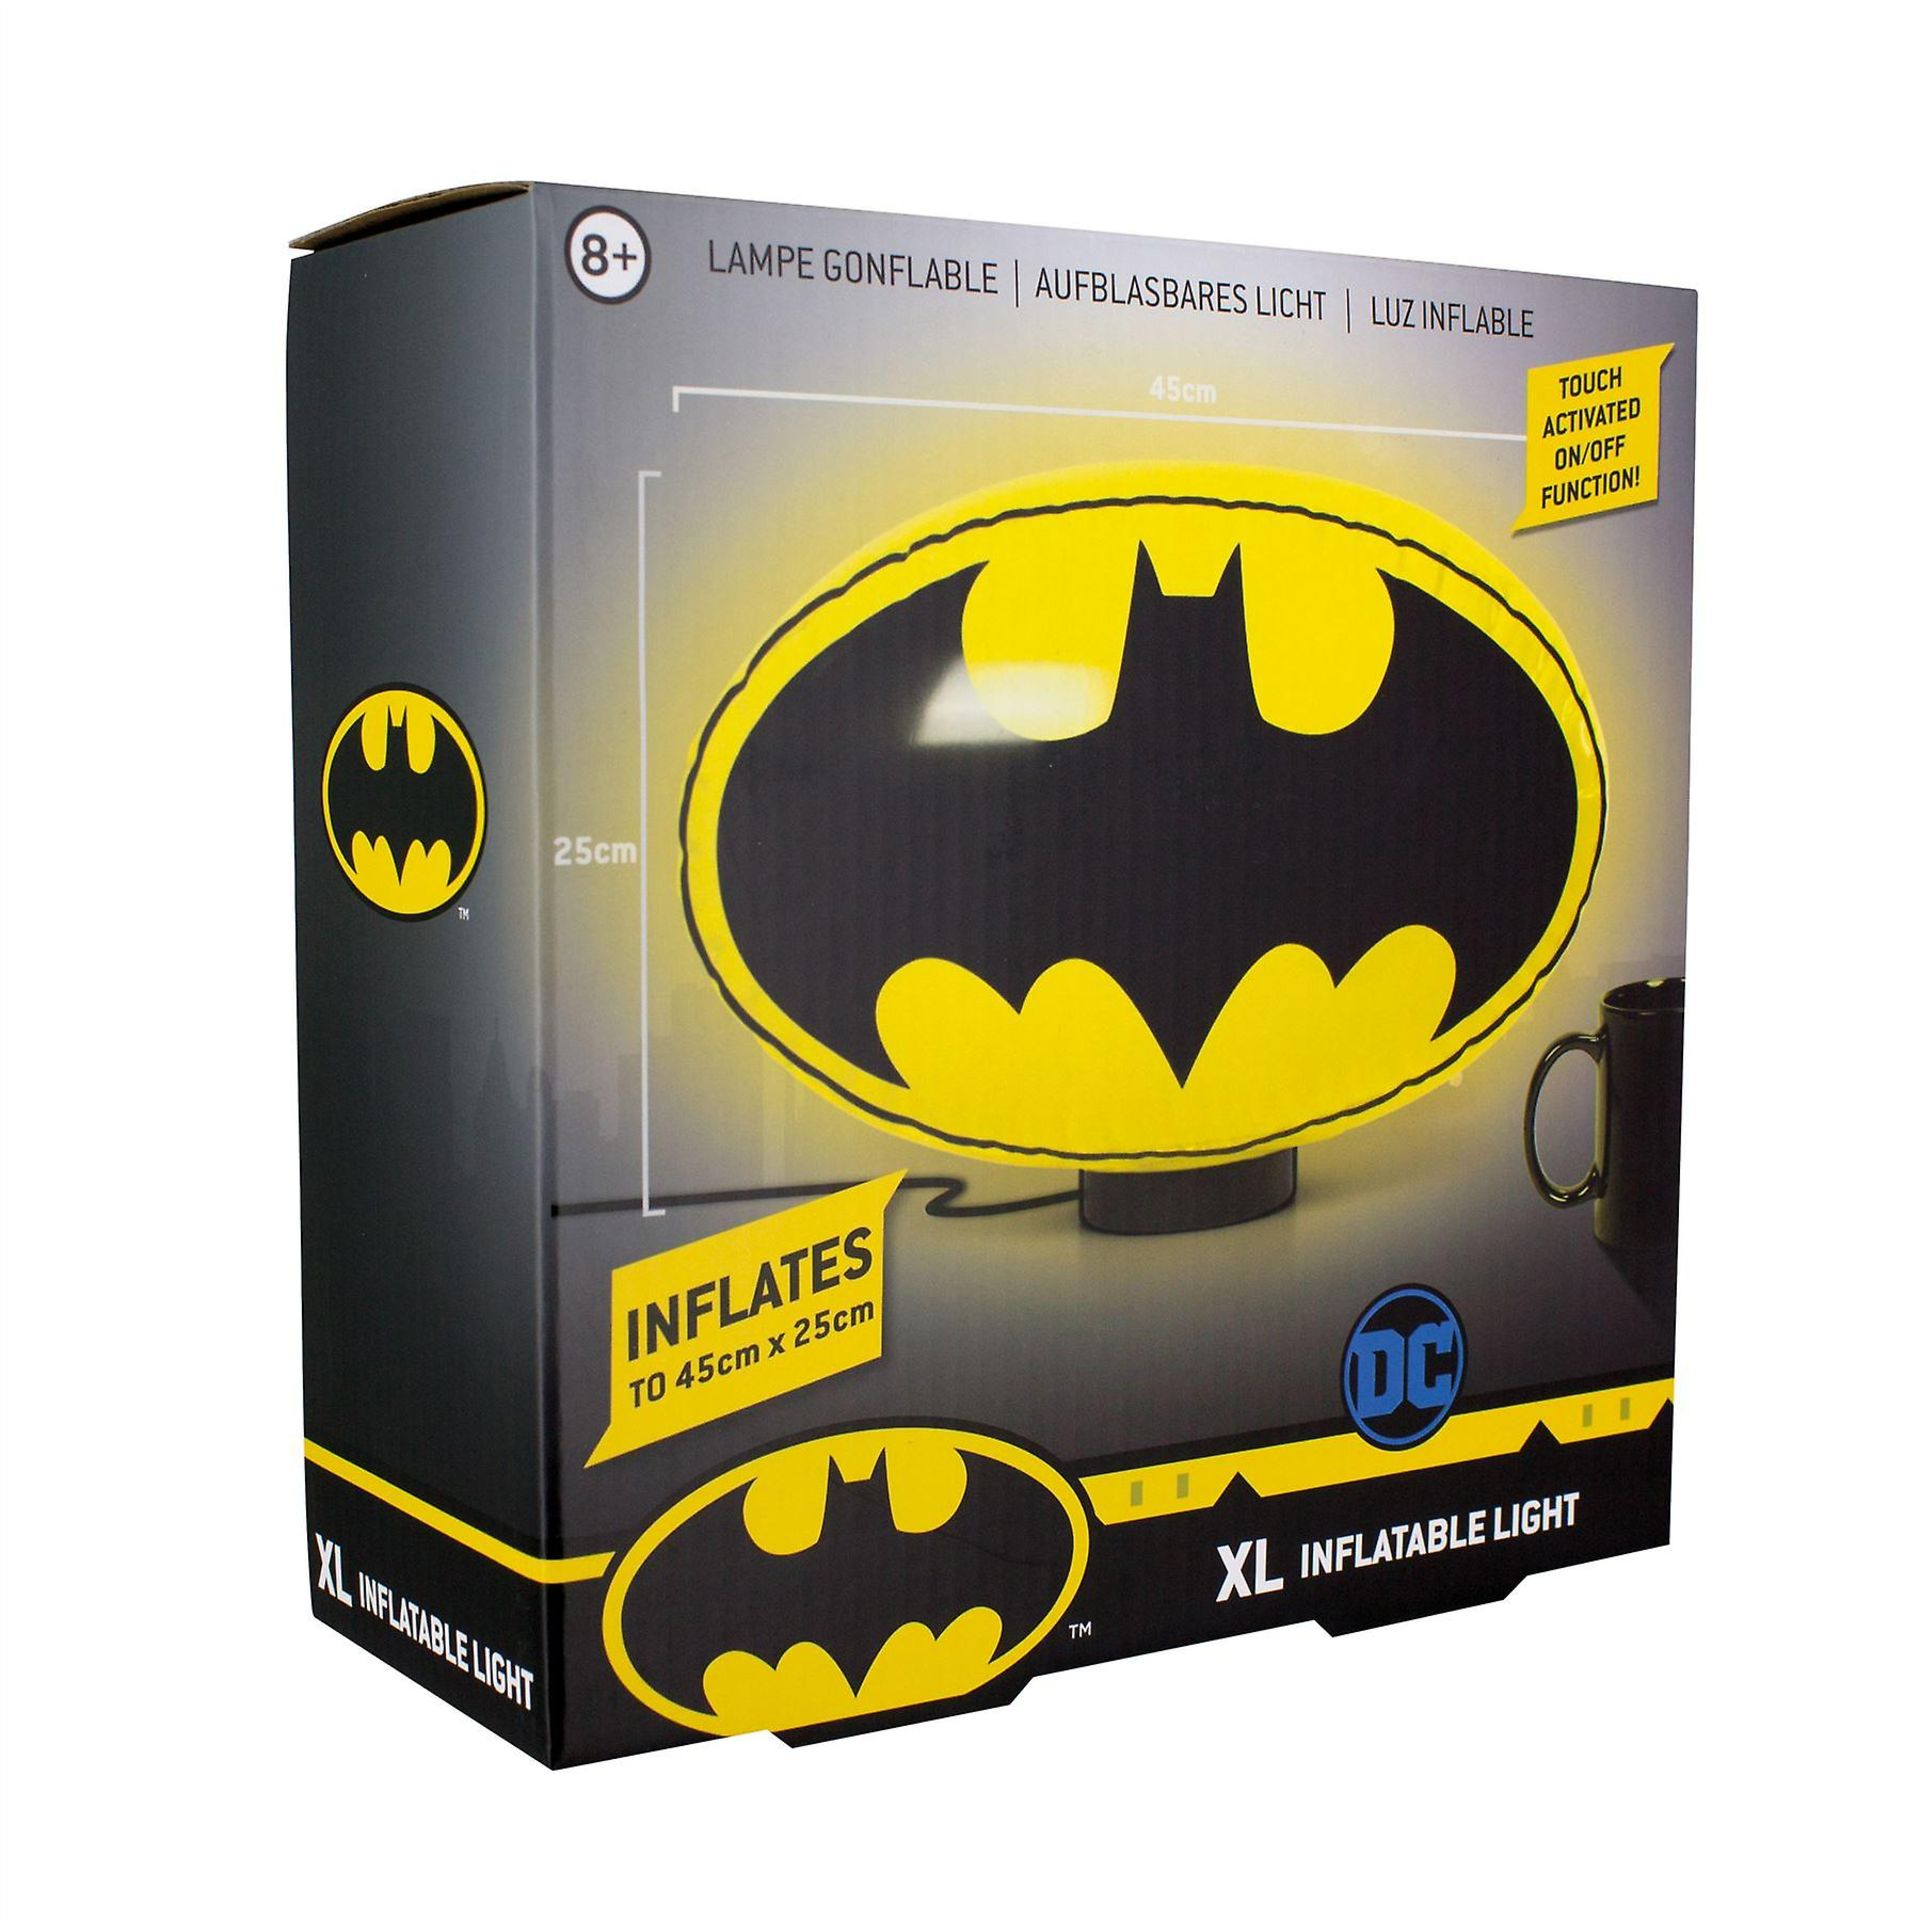 10pcs official Licensed Batman DC comics inflateable light with USB charger